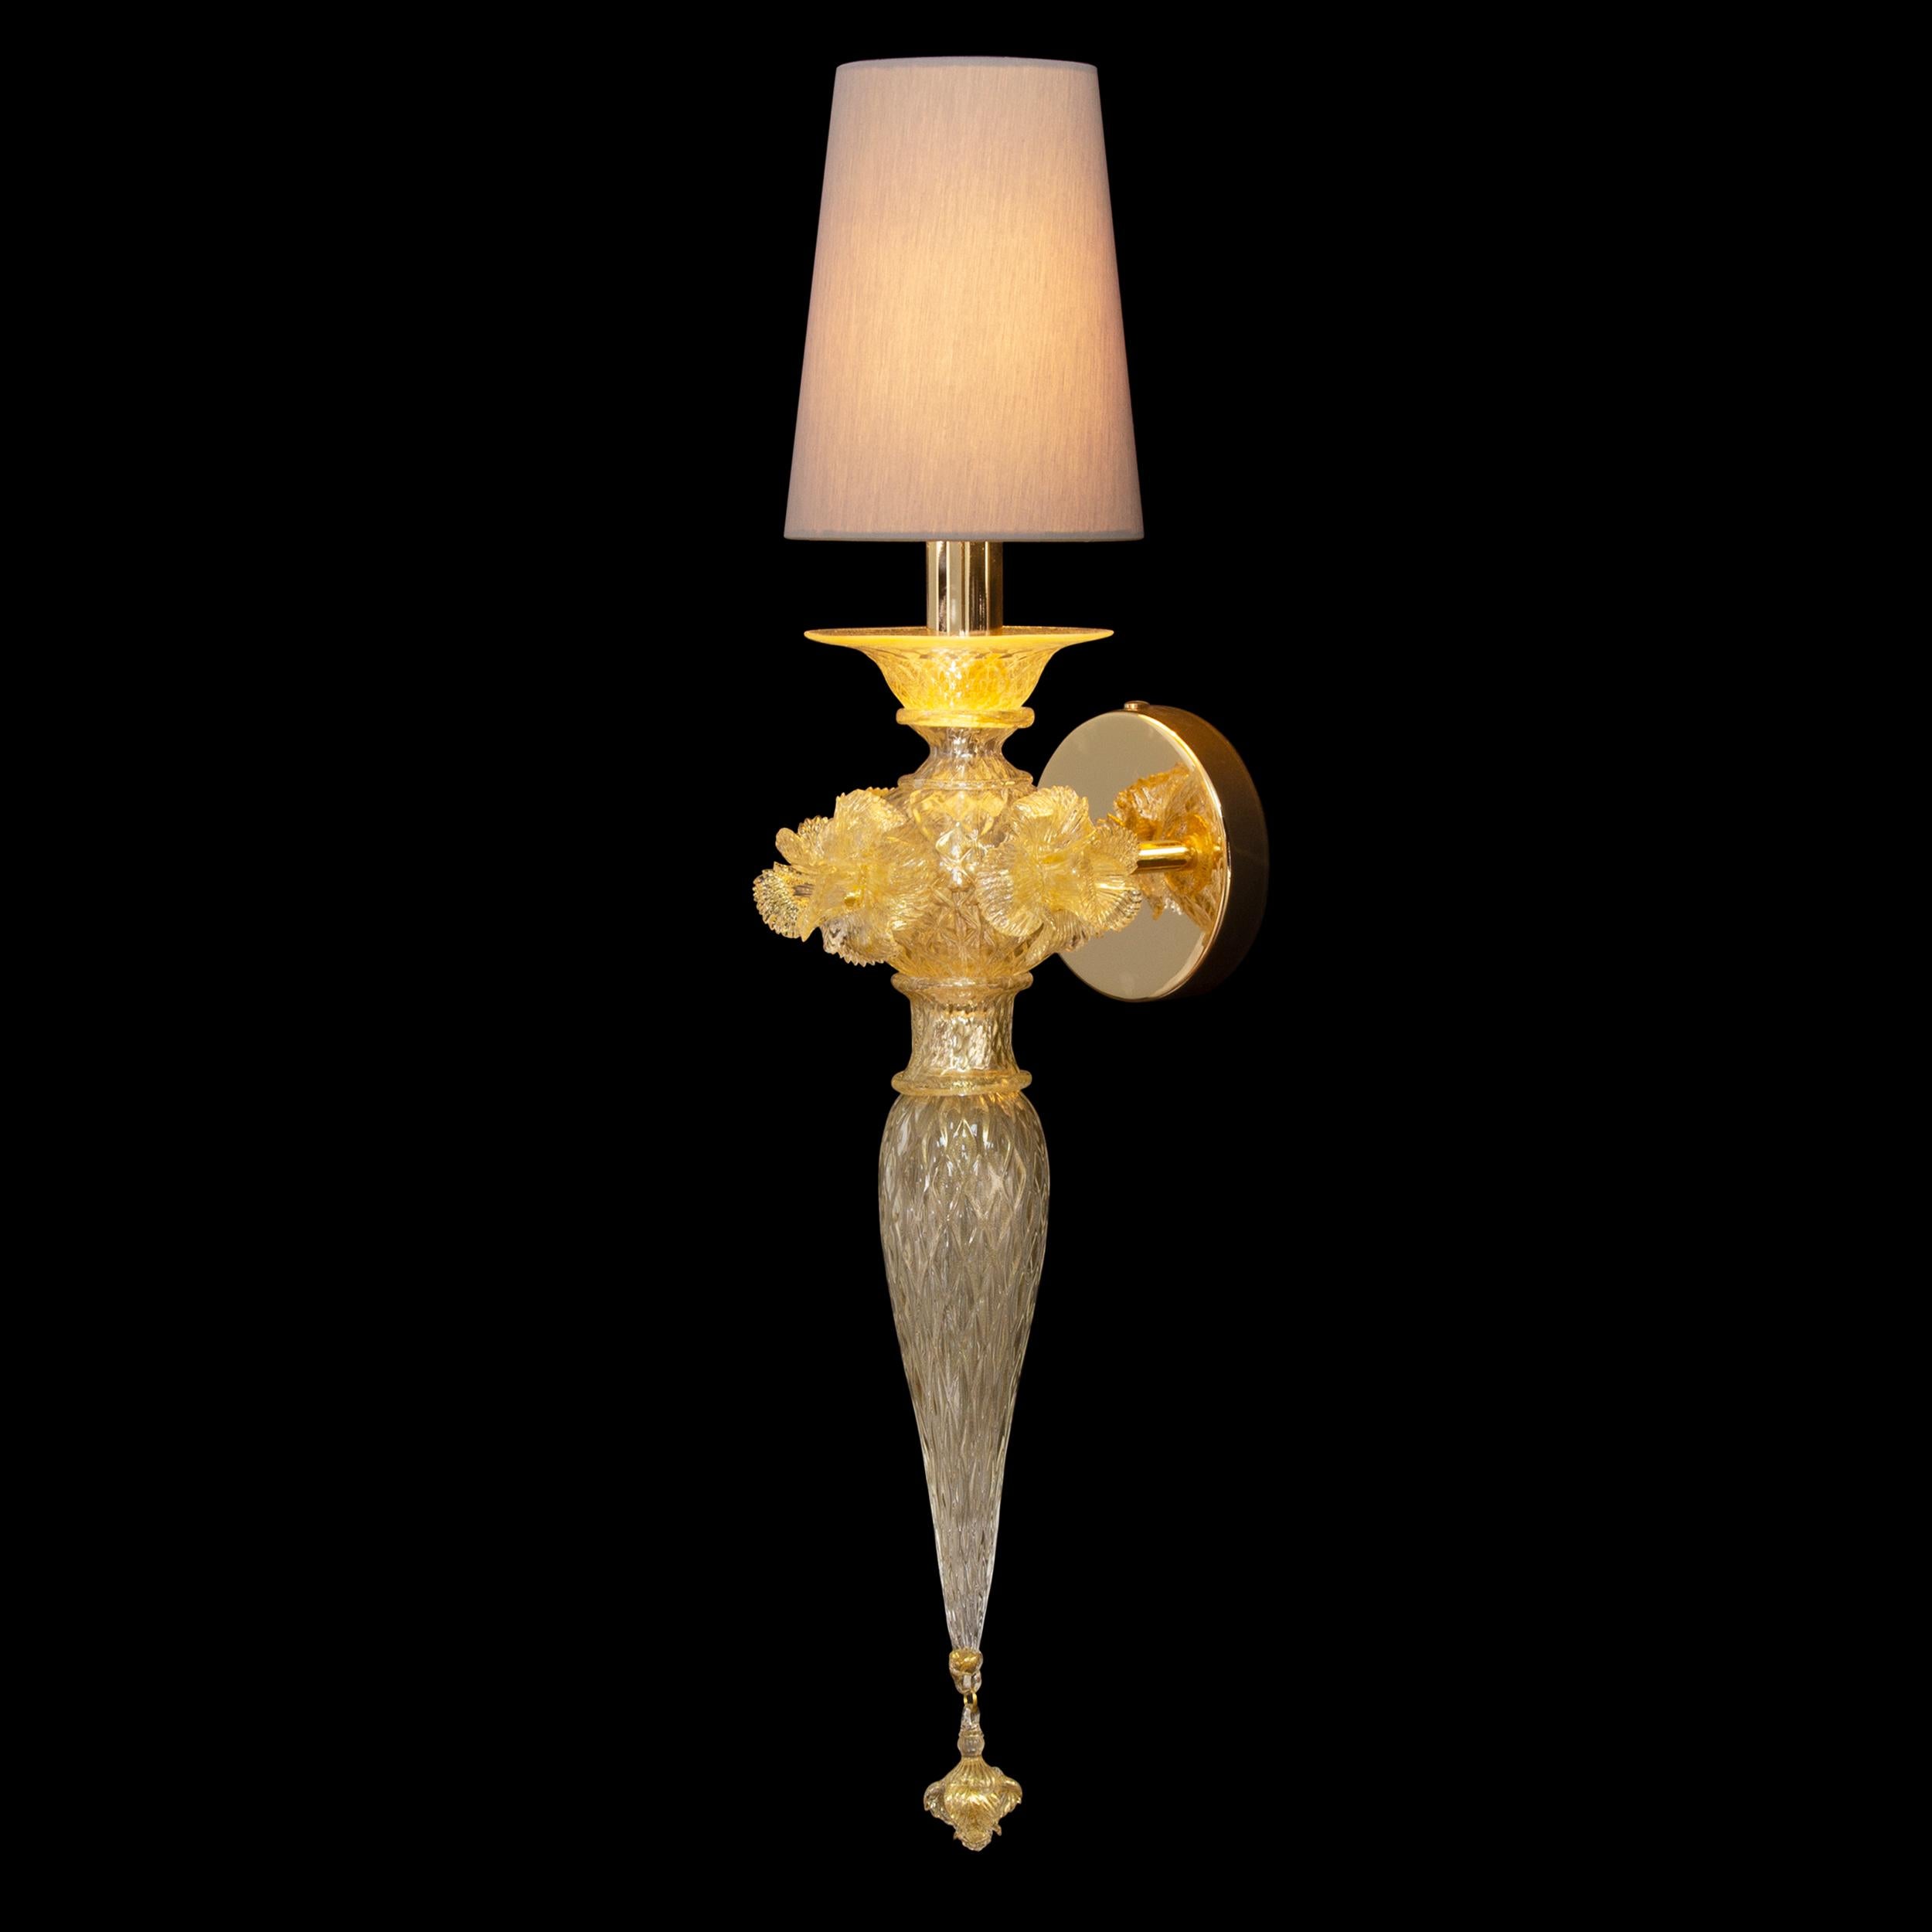 Single sconce 1 light in clear and gold Murano glass. Details with flowers by Multiforme.
To manufacture this sconce there has been used a “balloton” texture (a grid-like surface) while some flowers decorate the central part of the structure. The